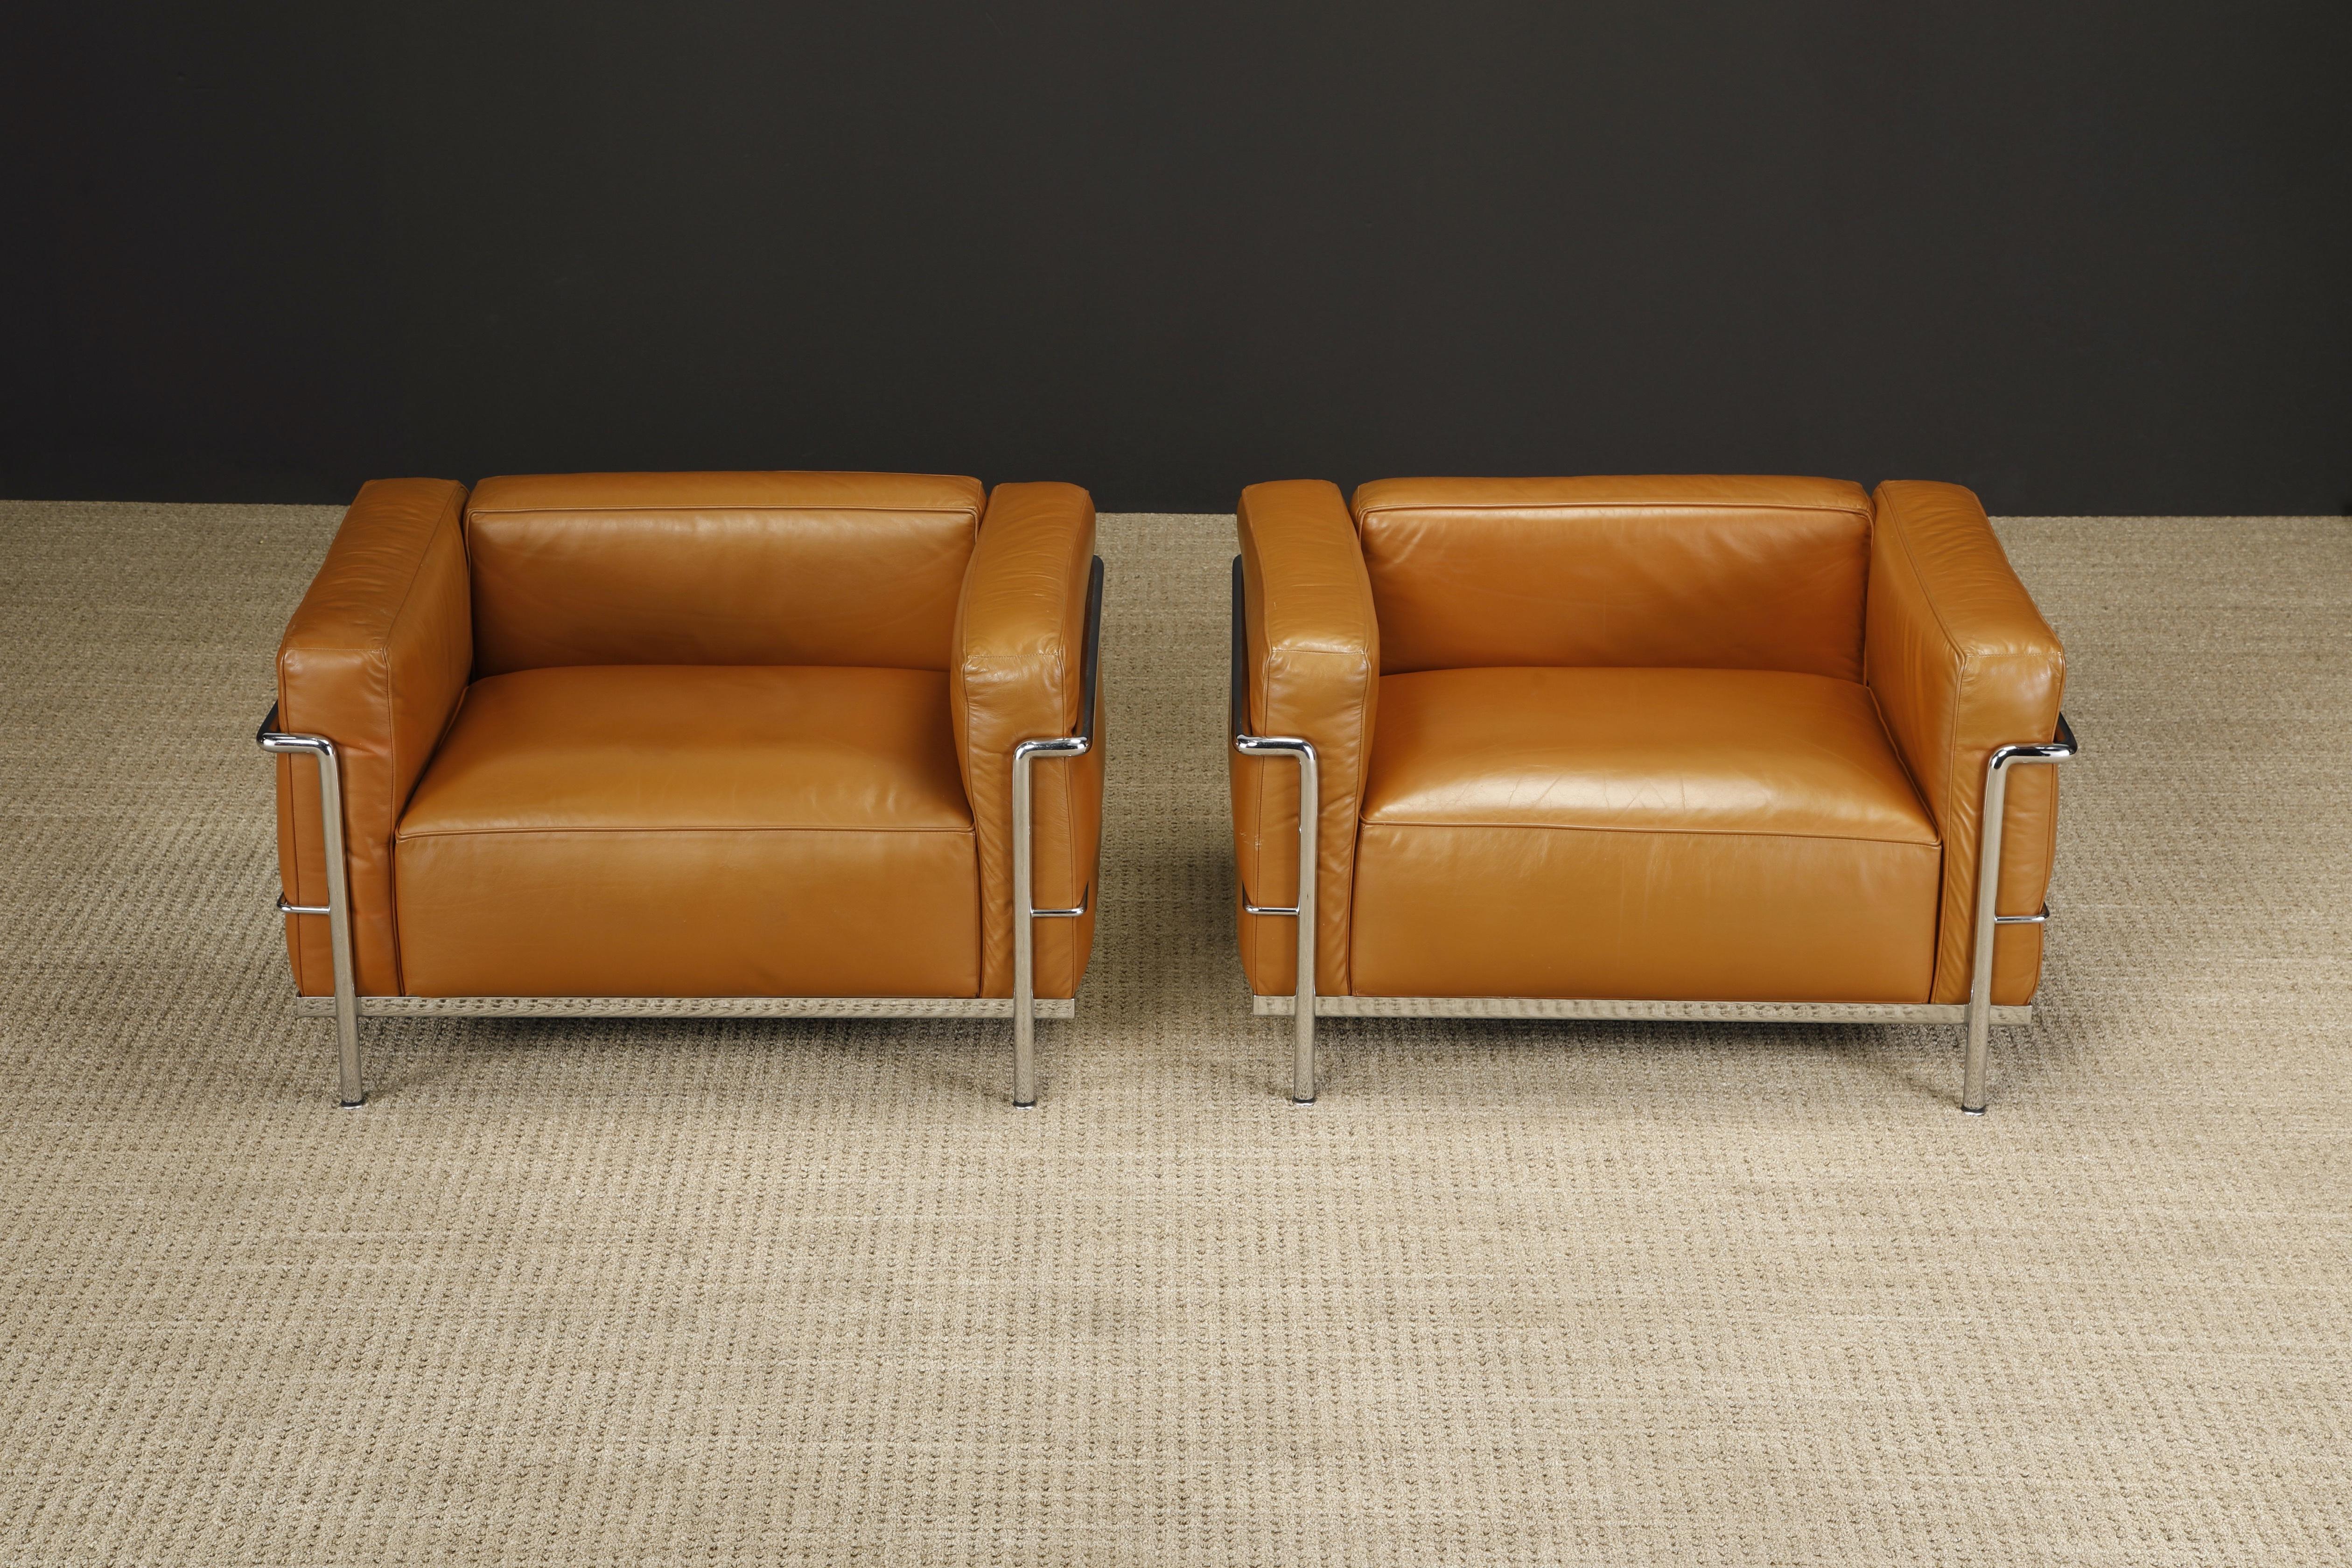 Bauhaus Early 'LC3' Club Chairs in Cognac Leather by Le Corbusier for Cassina, Signed